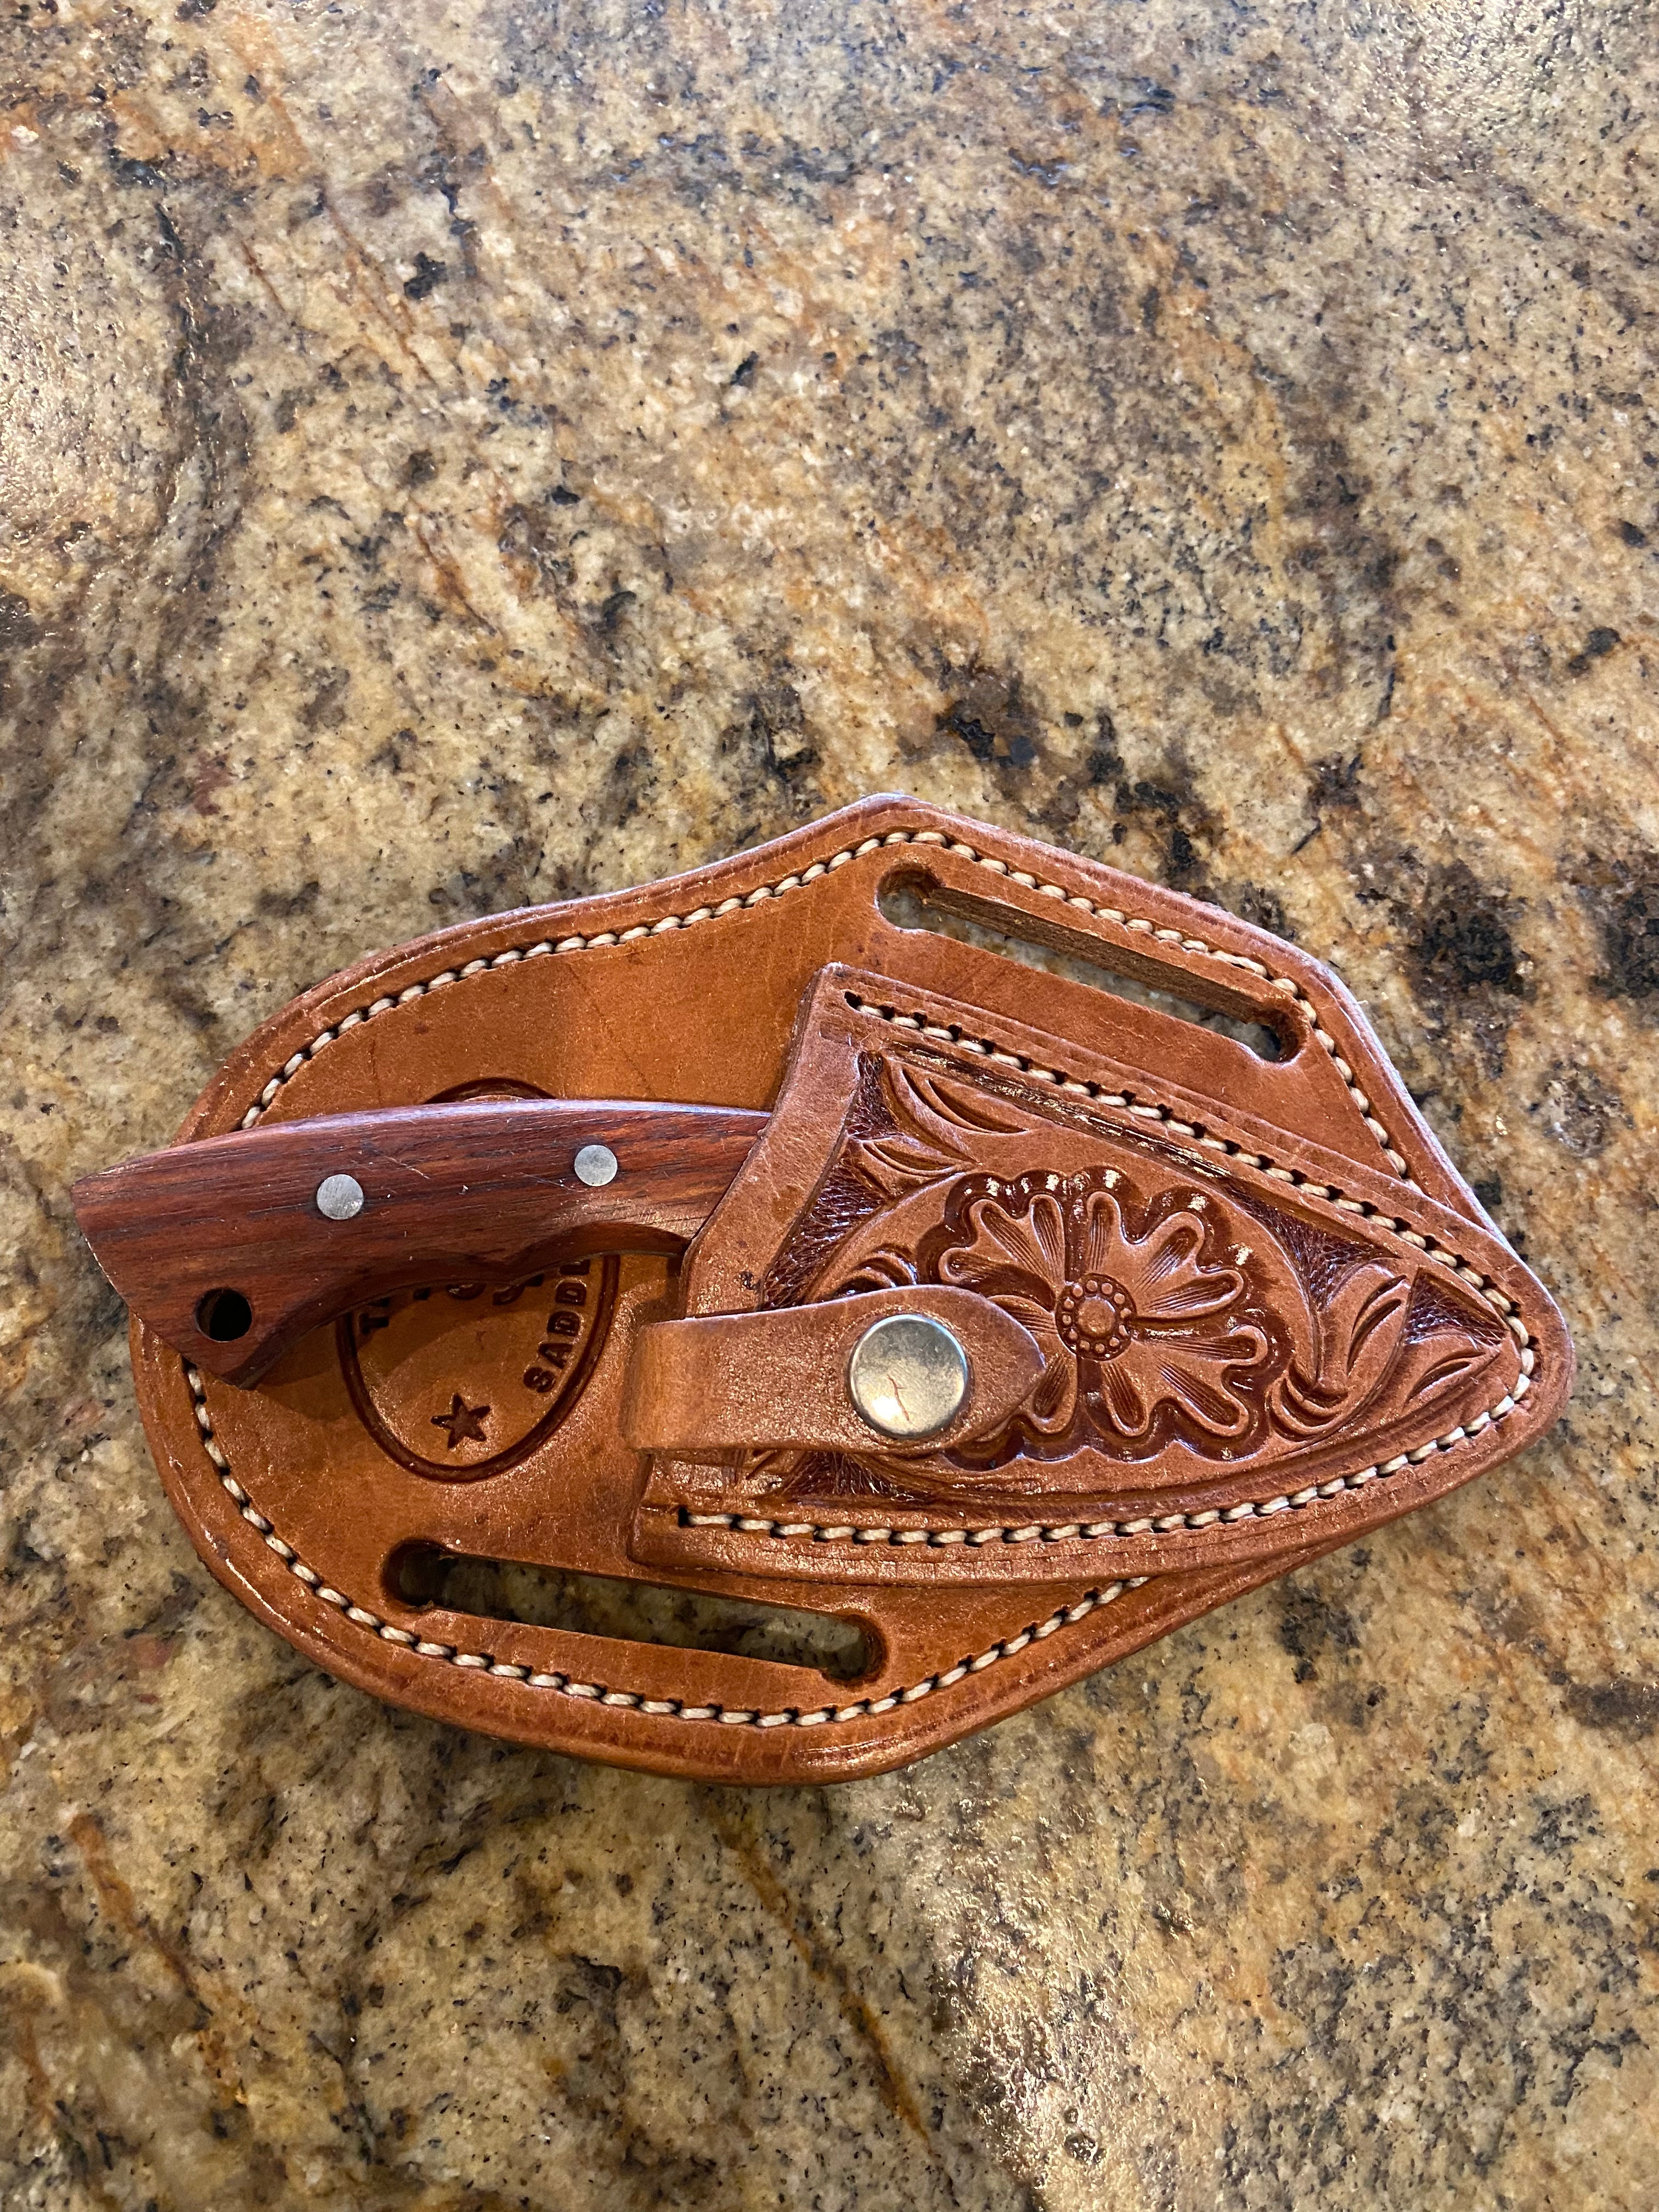 Leather Pocket Knife Sheath with Western Flower Design and Antique Spot